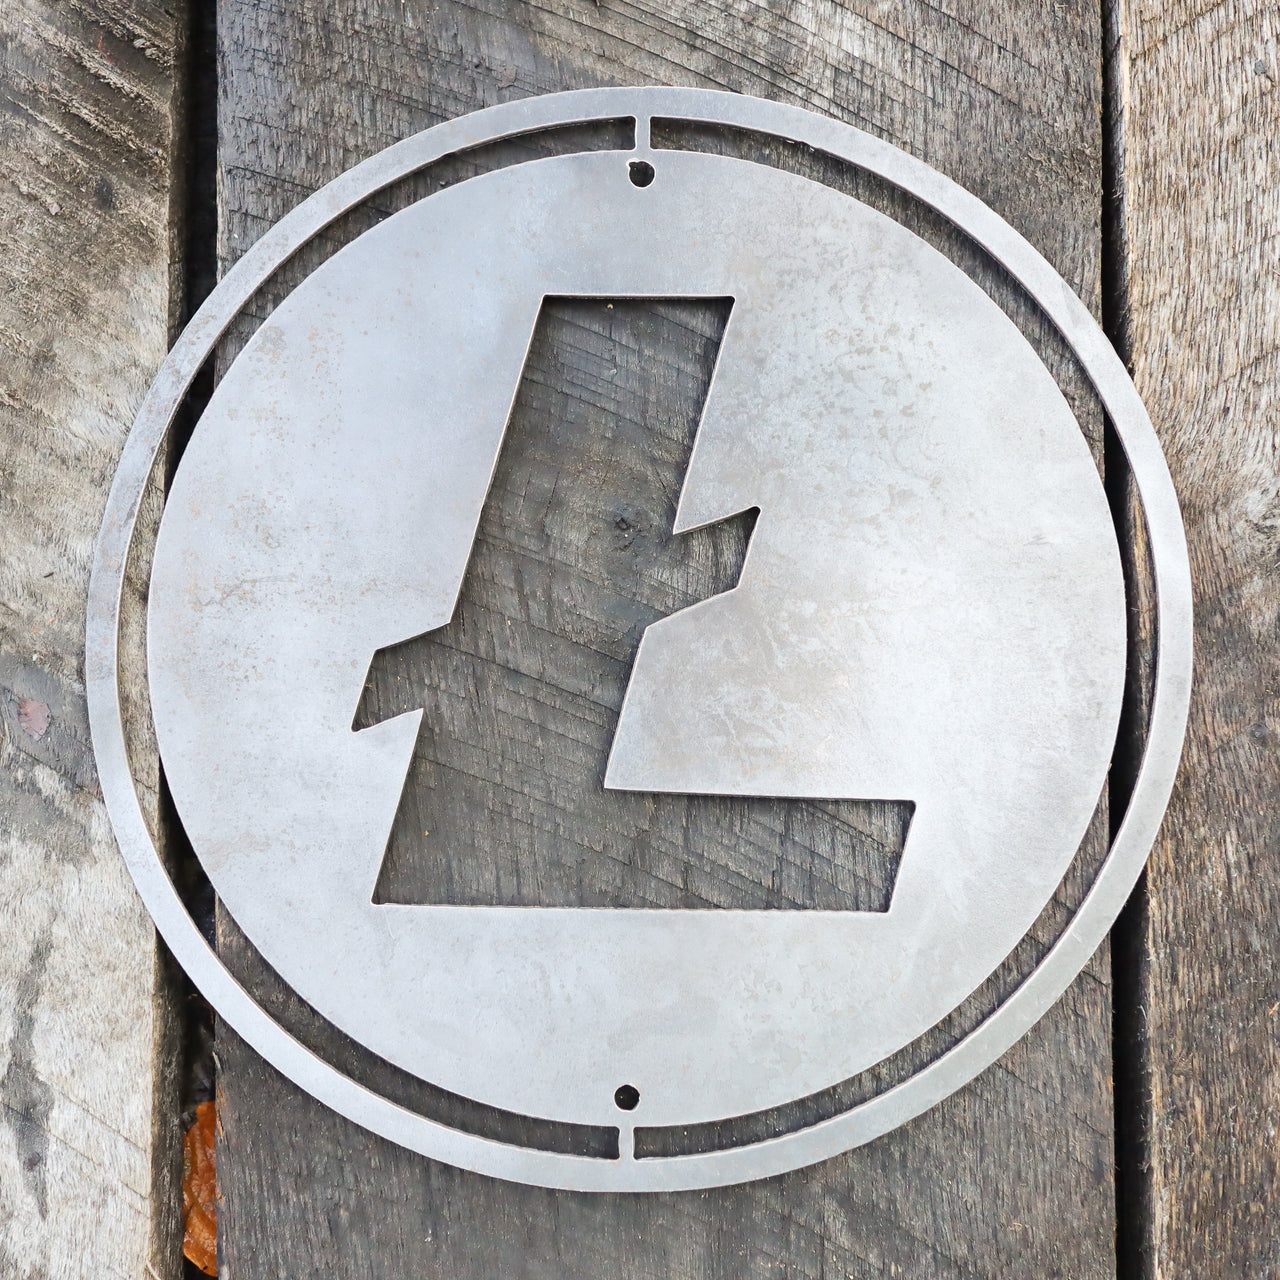 Metal Litecoin Shop Sign - Steel Cryptocurrency Business Decor - Custom Size Crypto Bitcoin Altcoin